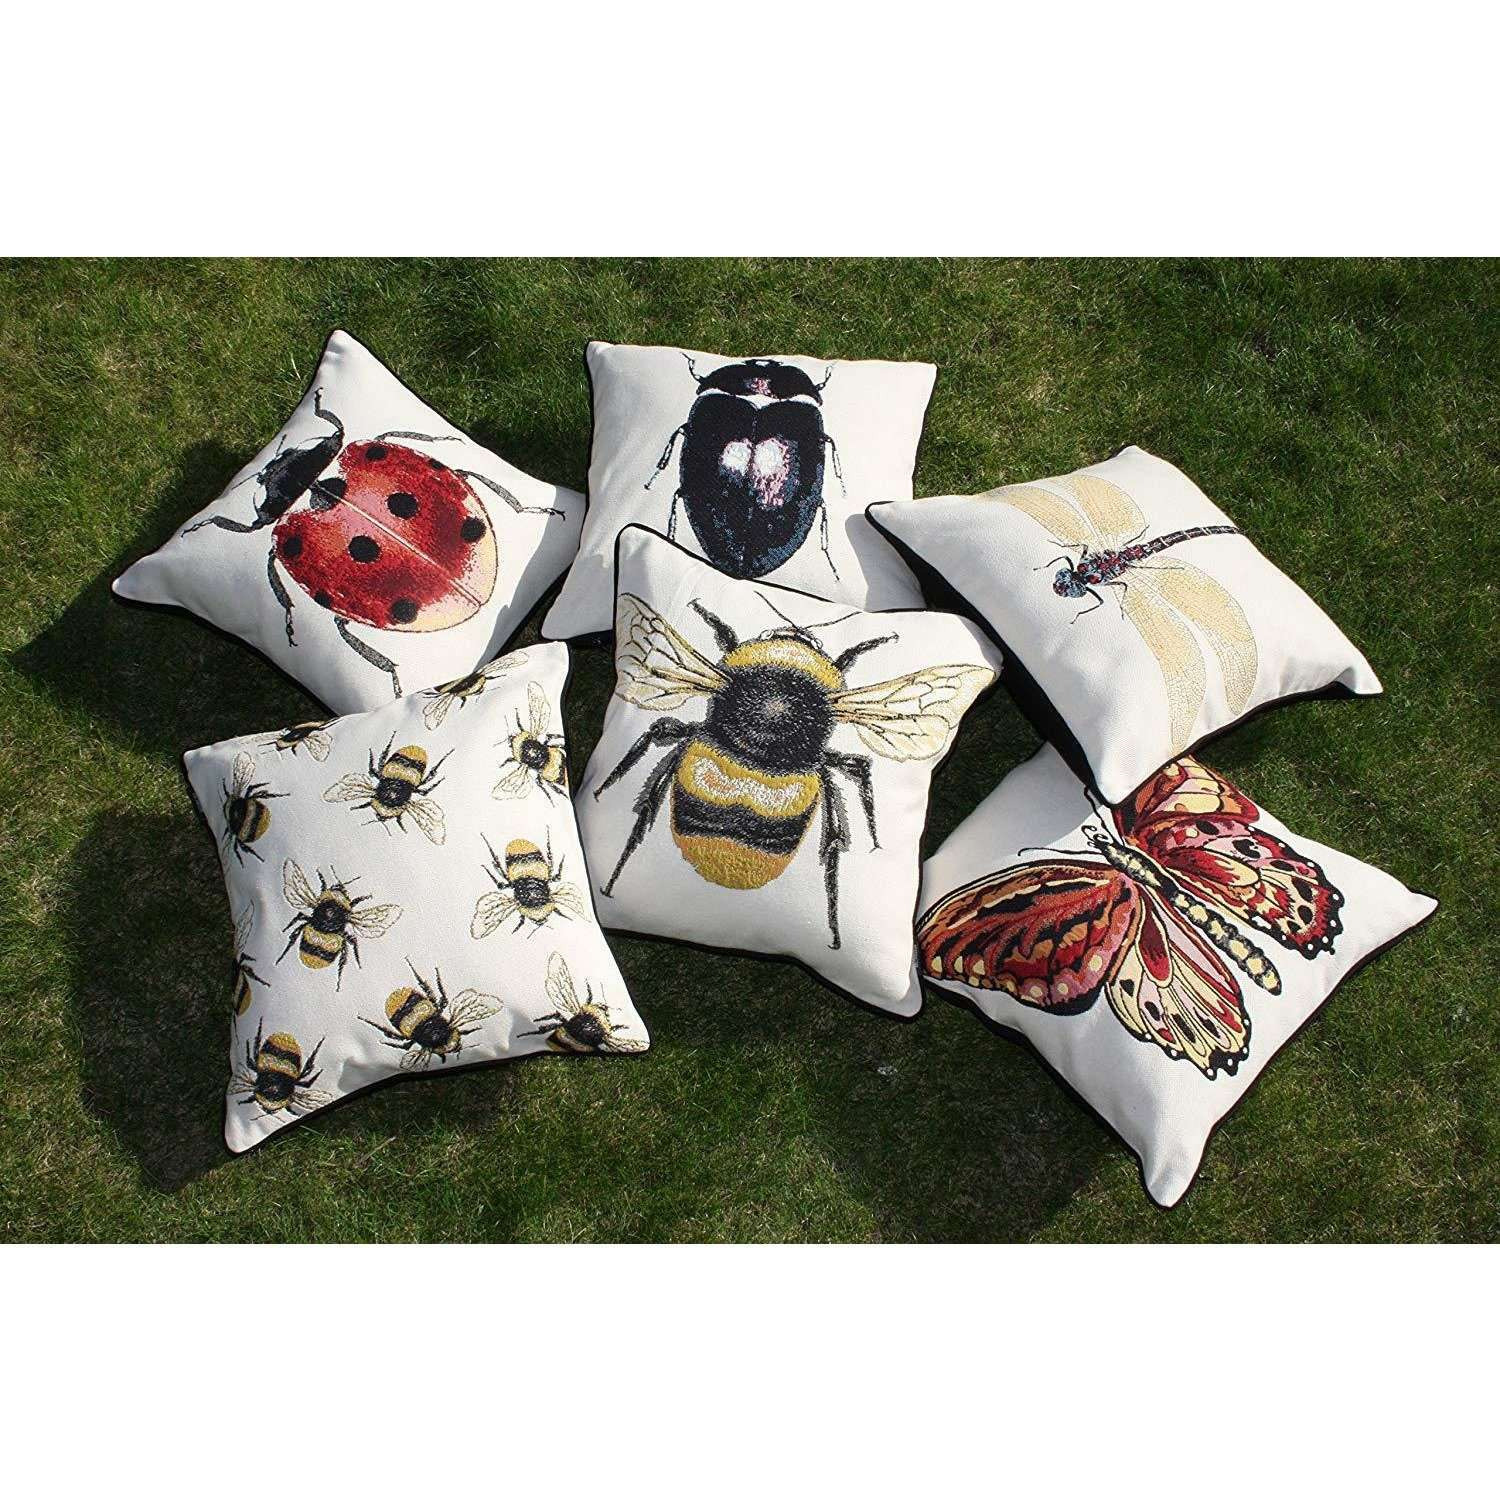 Bug's Life Scatter Cushion Sets, Set of 6 / Filled Cushions